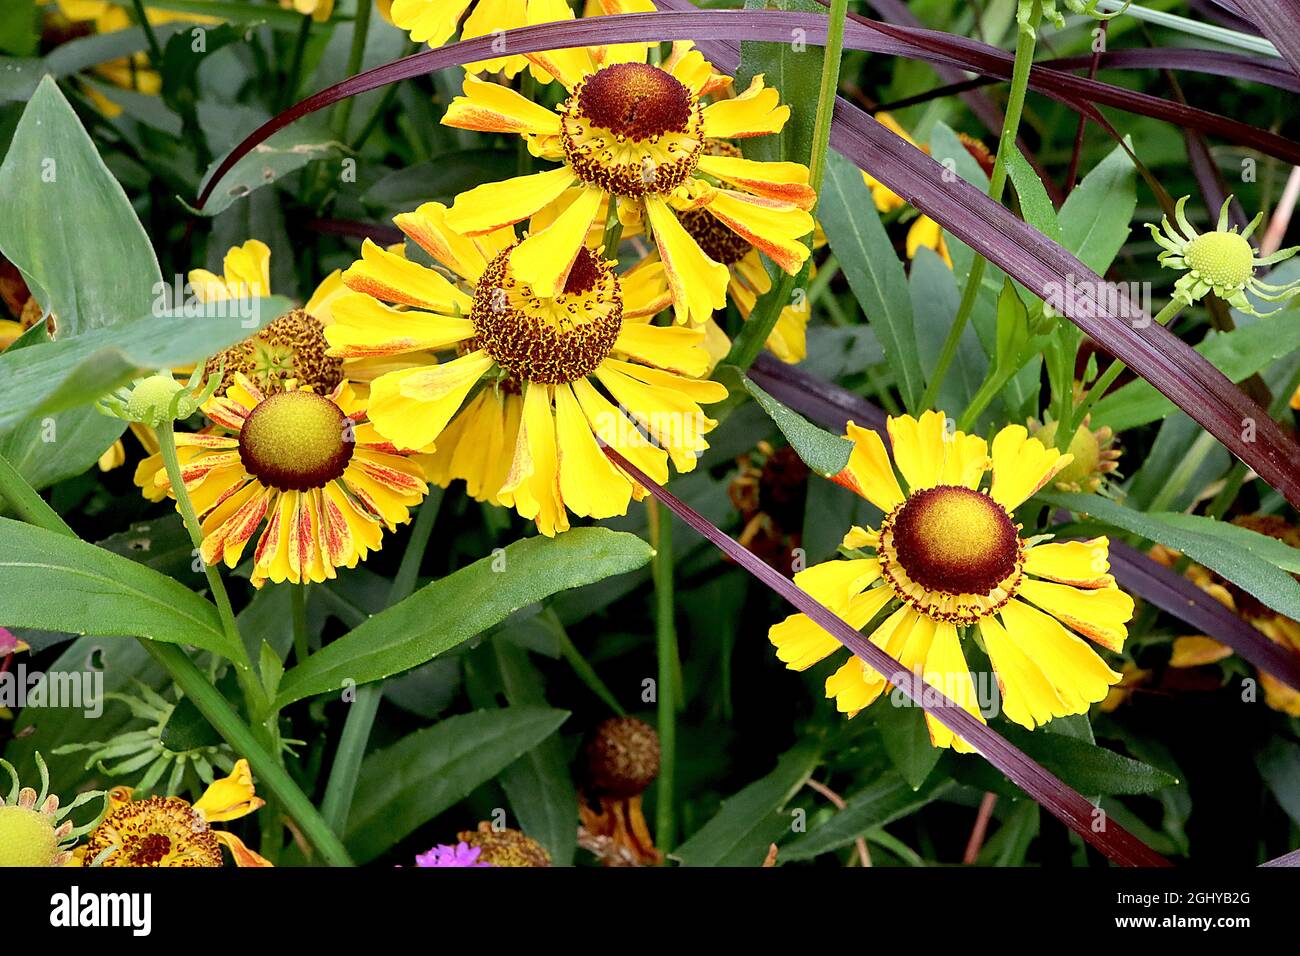 Helenium autumnale ‘Zimbelstern’ sneezeweed Cymbal Star – yellow flowers with brown centre,  August, England, UK Stock Photo